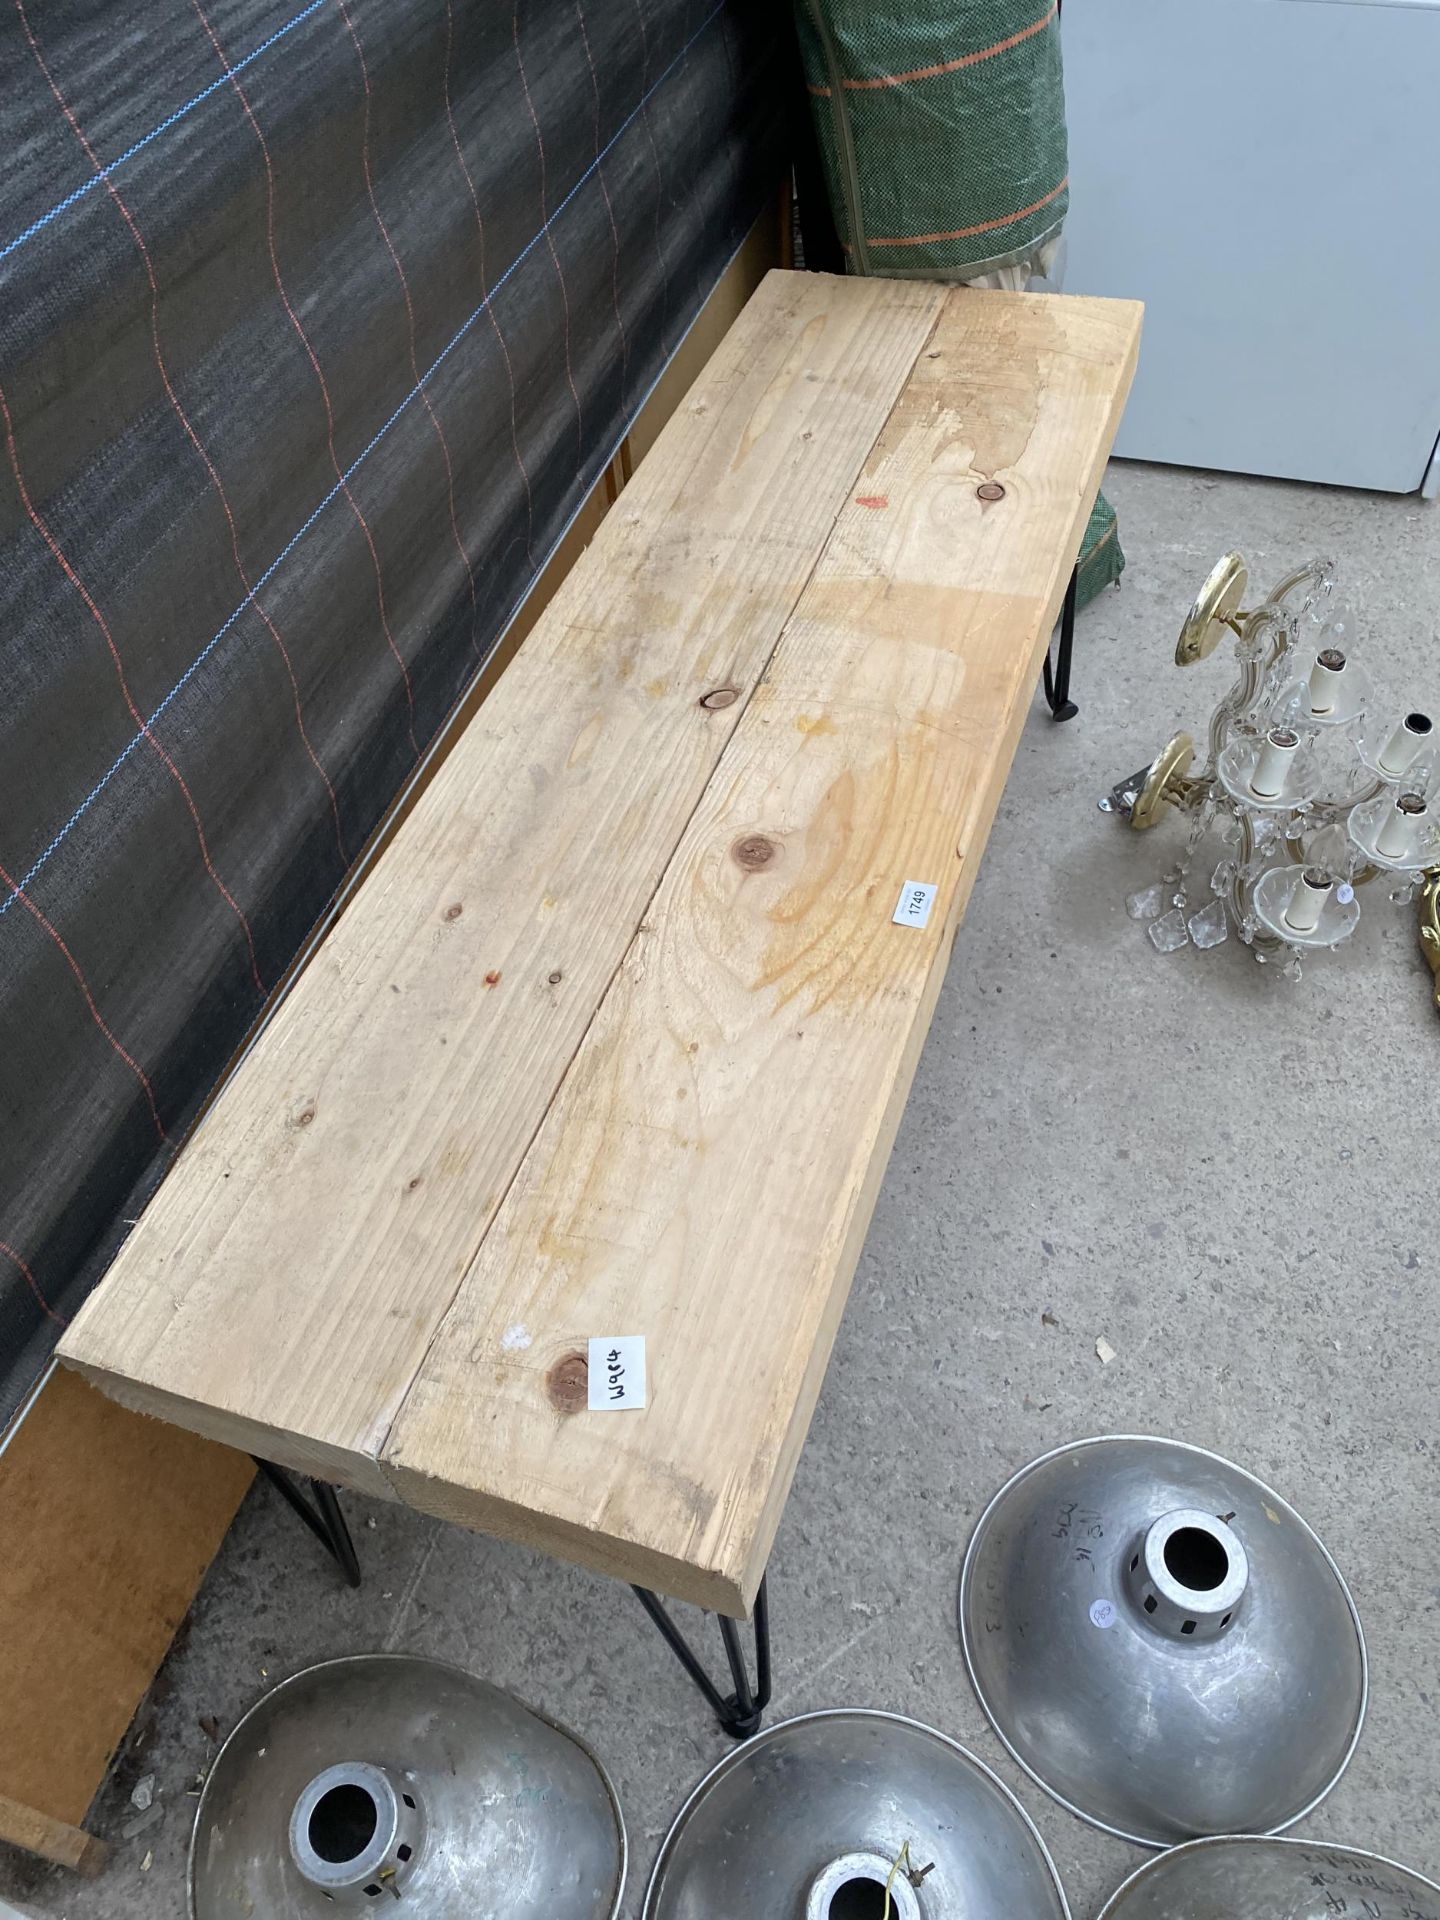 A WOODEN PLANK TOPPED BENCH WITH METAL LEGS - Image 3 of 3